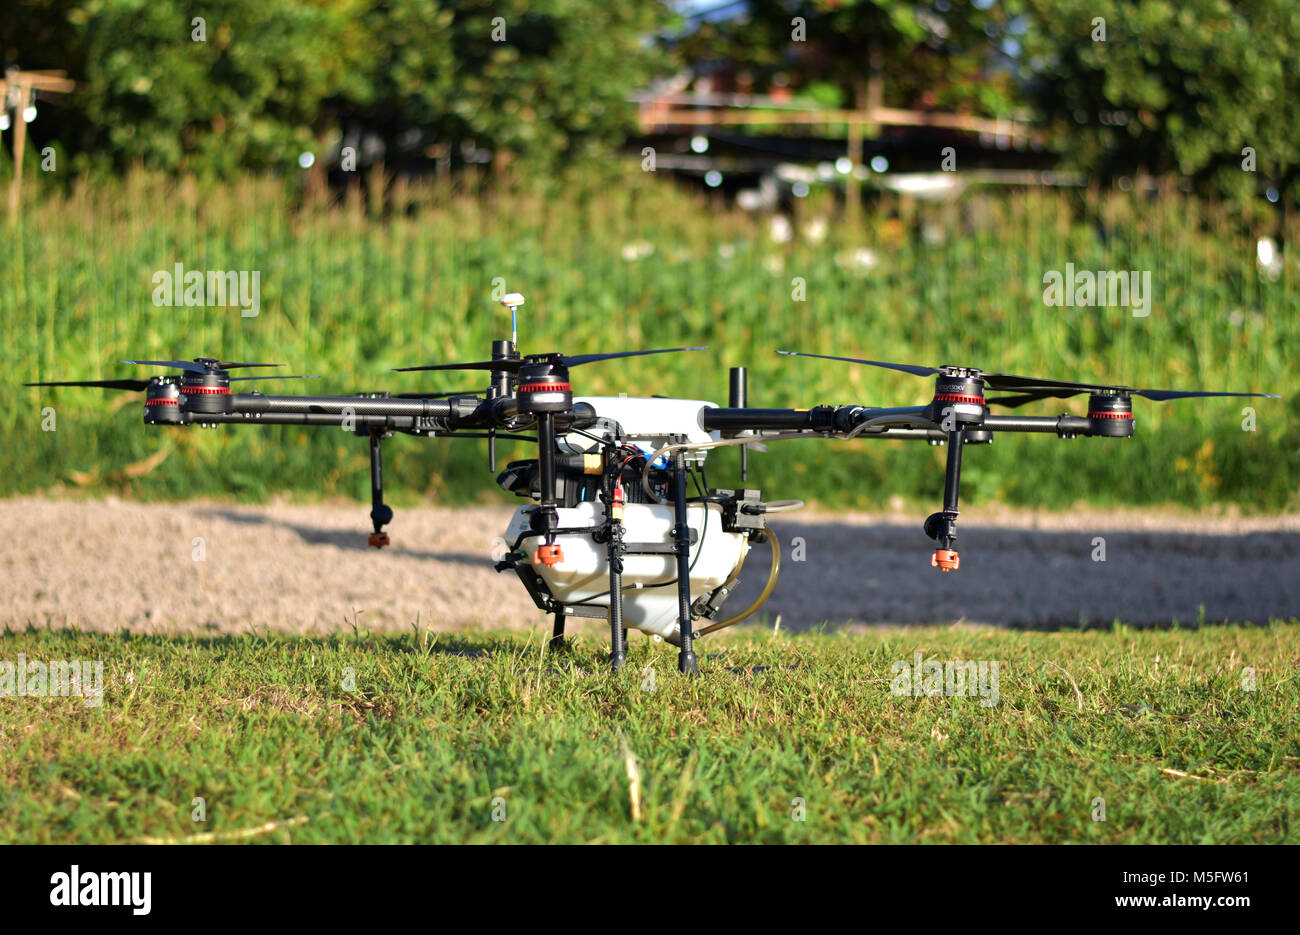 Agriculture drone, photo image of agriculture drone carry a tank of liquid fertilizer parking on green grass ground prepare to spray it in farming are Stock Photo